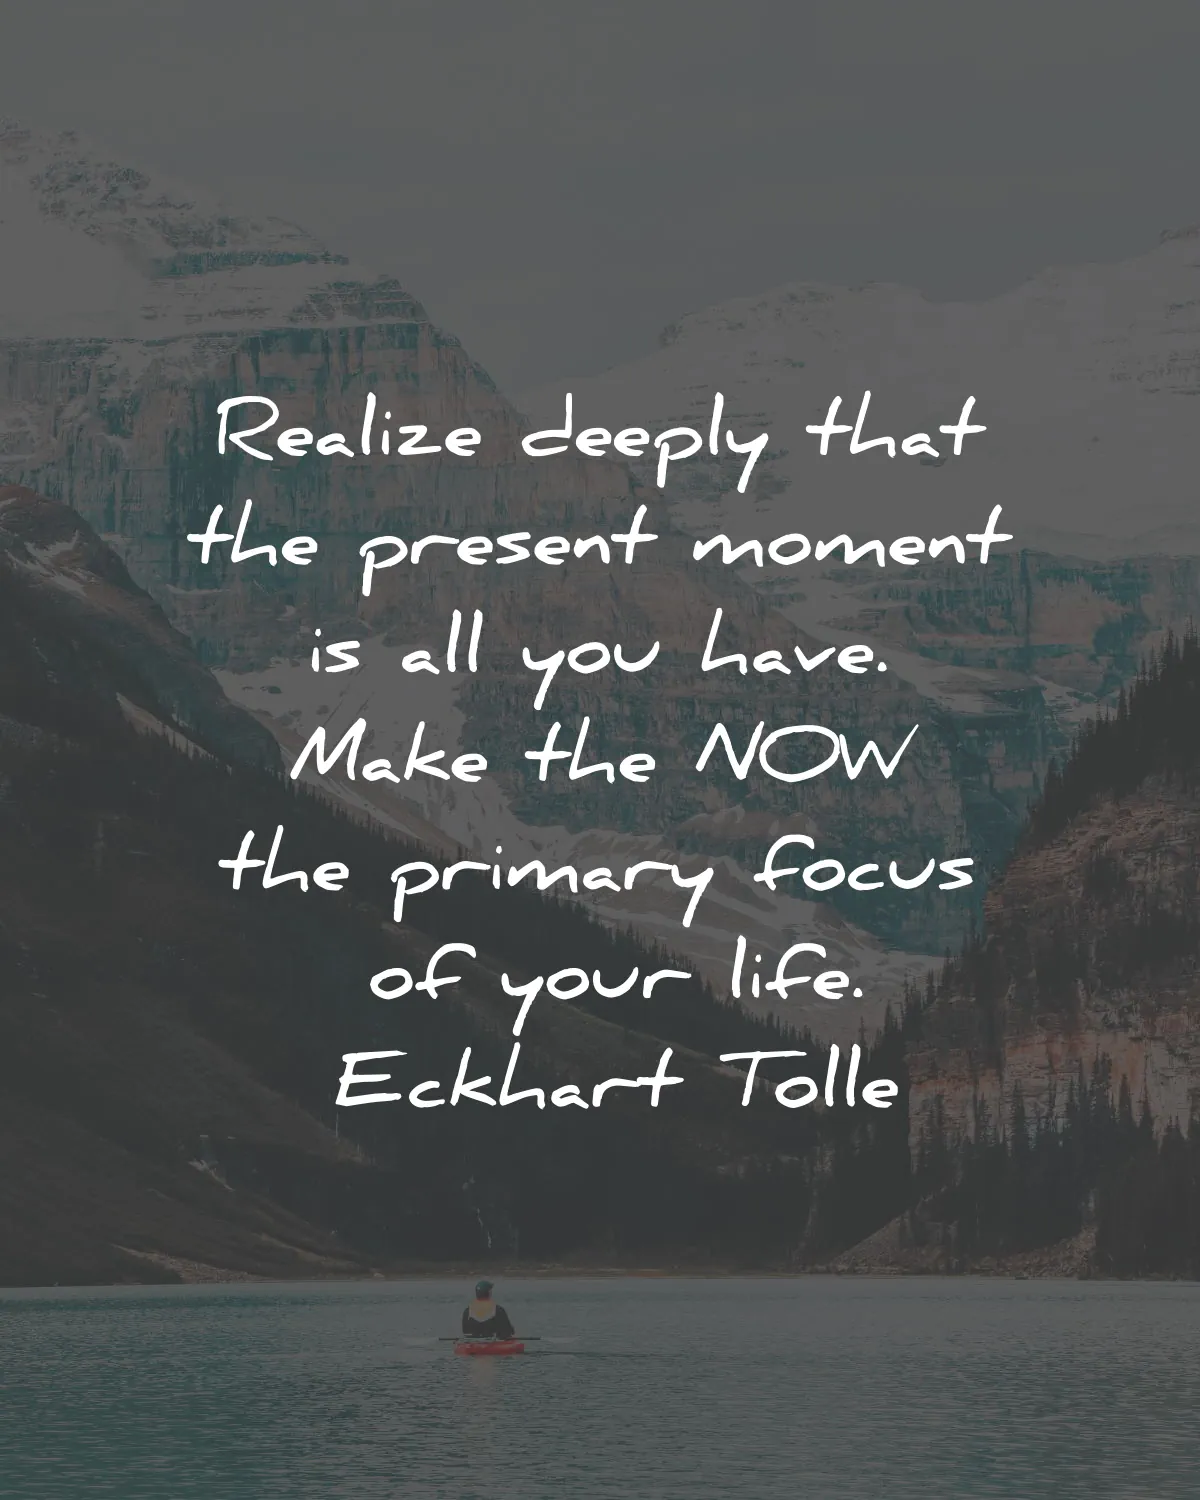 the power of now quotes summary eckhart tolle realize deeply present moment now focus life wisdom